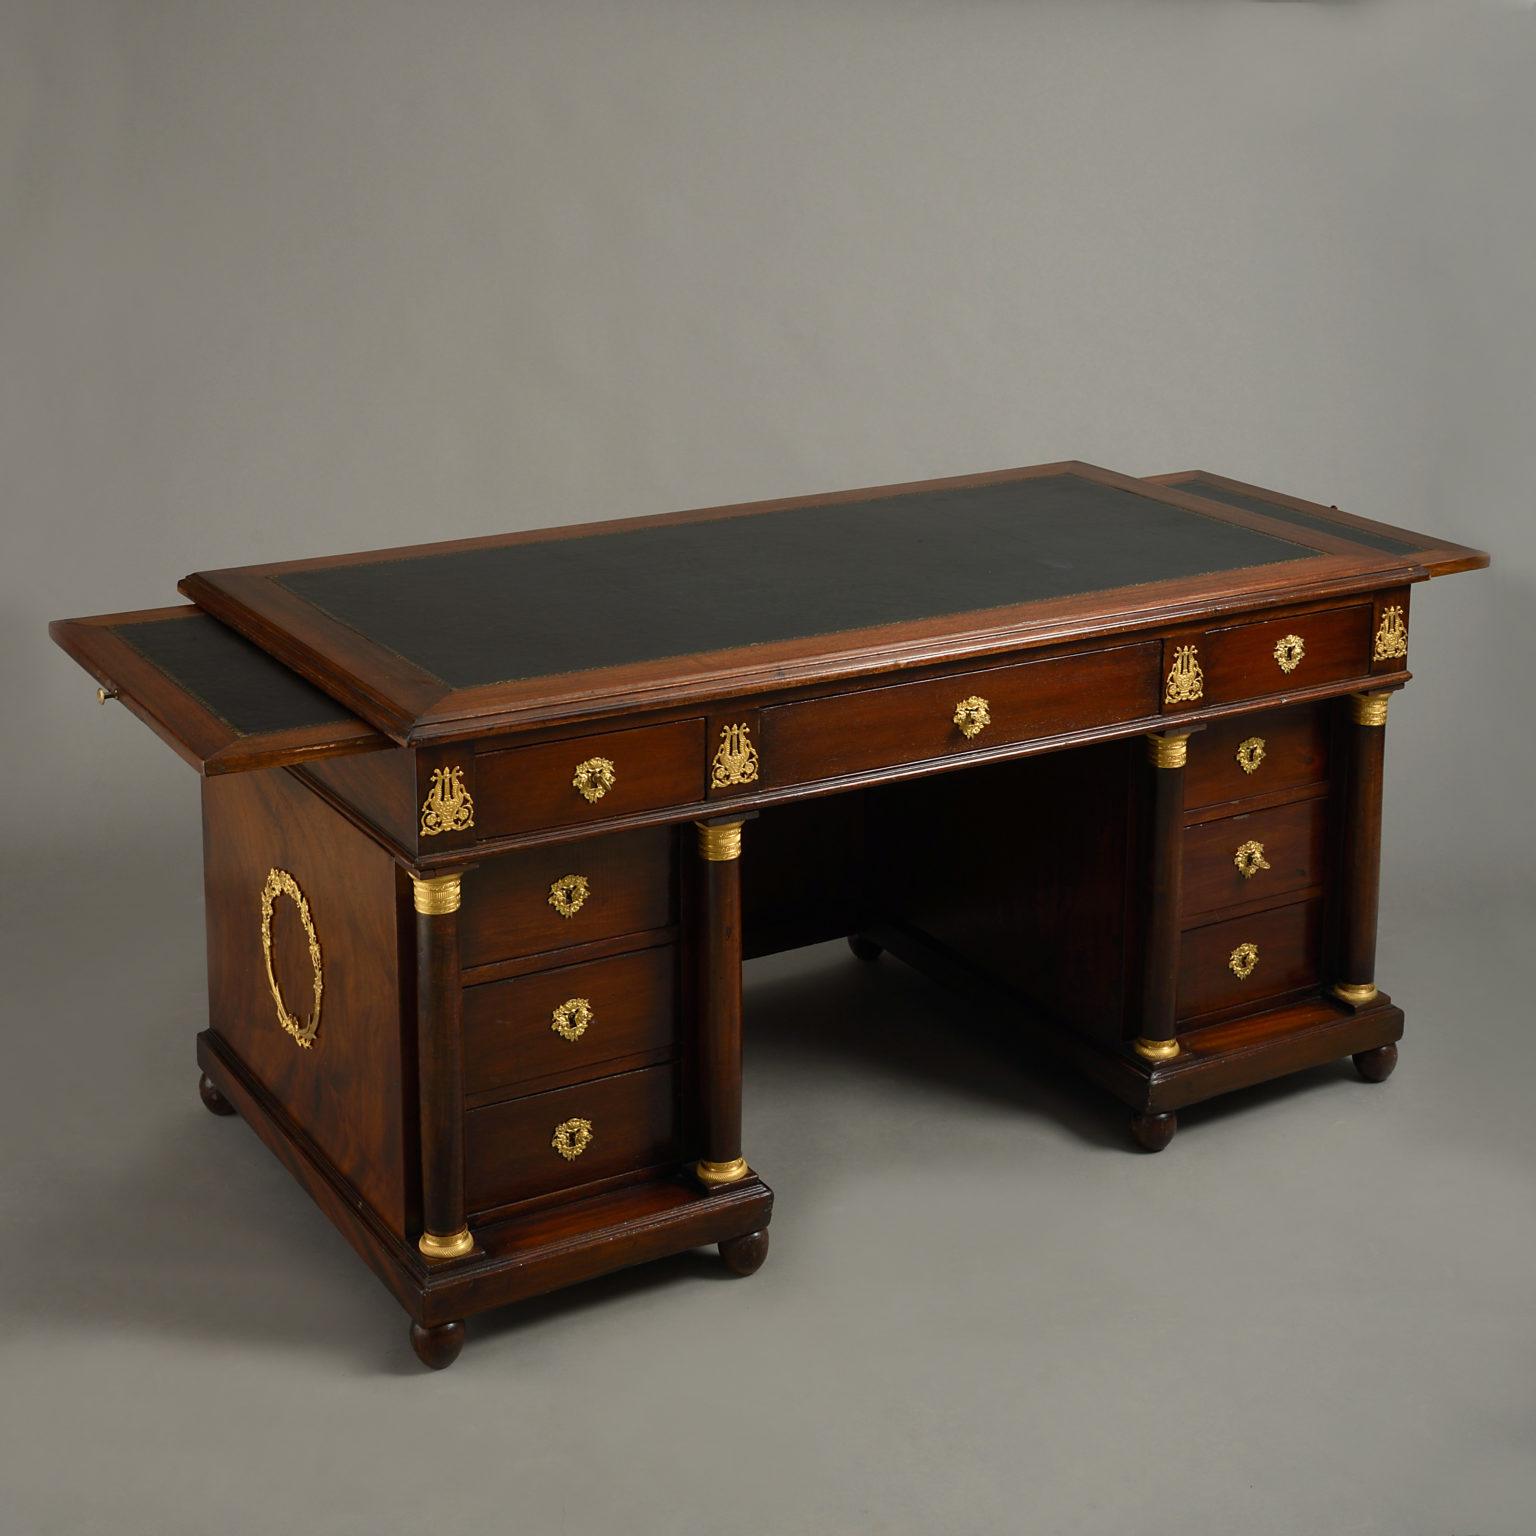 A mid-20th century mahogany desk of good scale, the tooled leather overhanging top with side candle slides of the same and having one long and two short drawers and set upon two plinth supports, each flanked by classical columns with engine turned